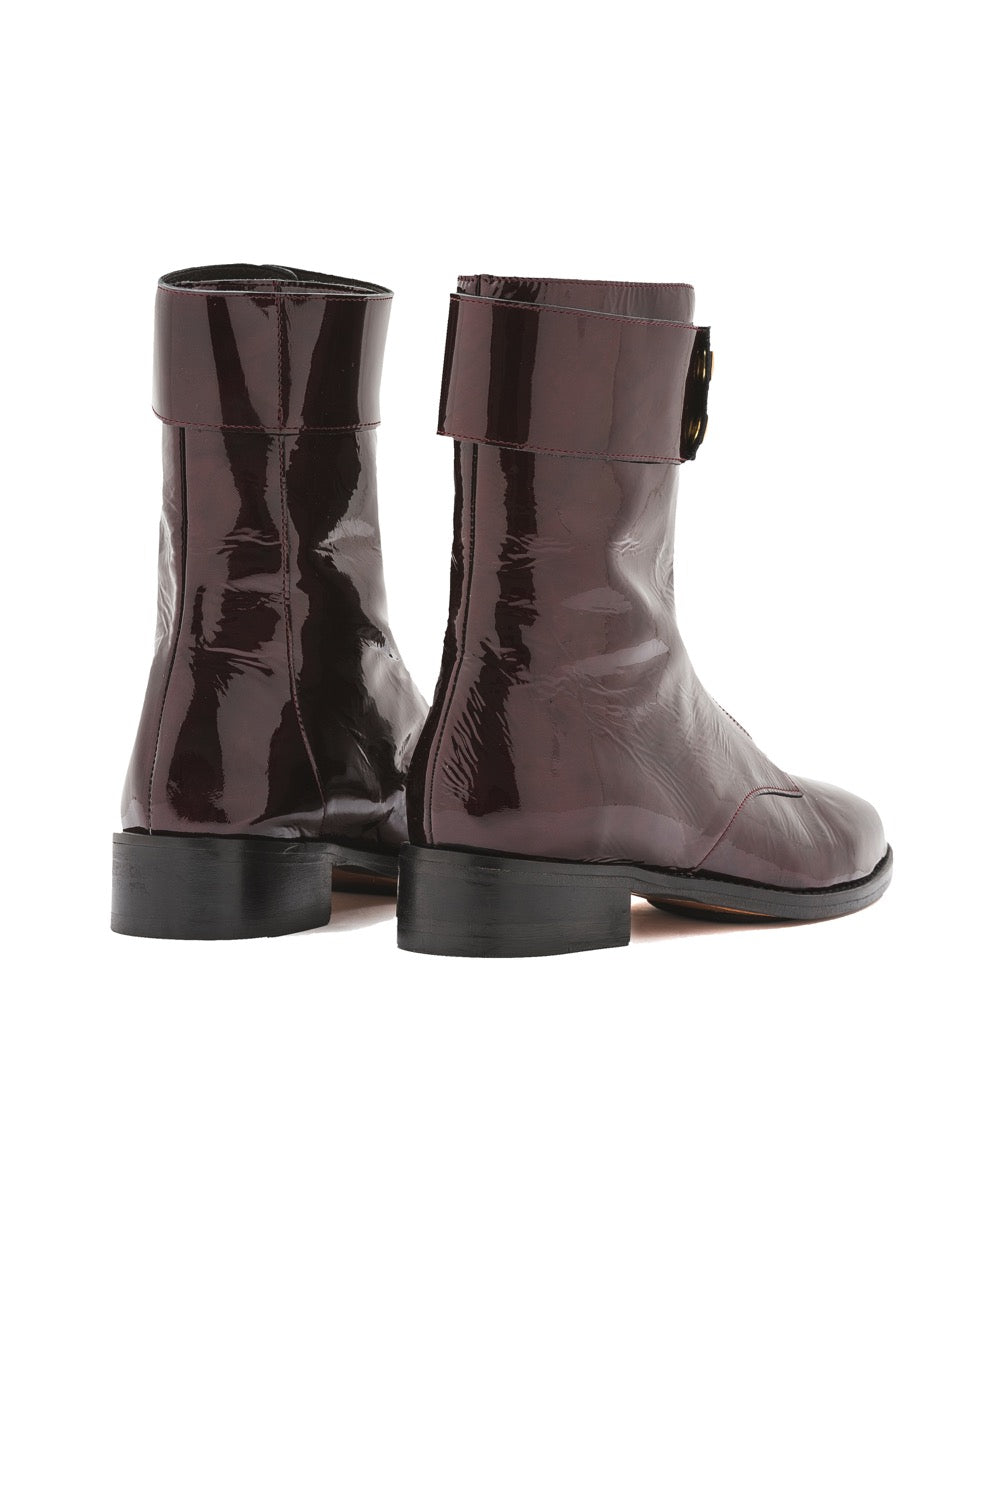 Woodstock Rangers boots in burgundy leather